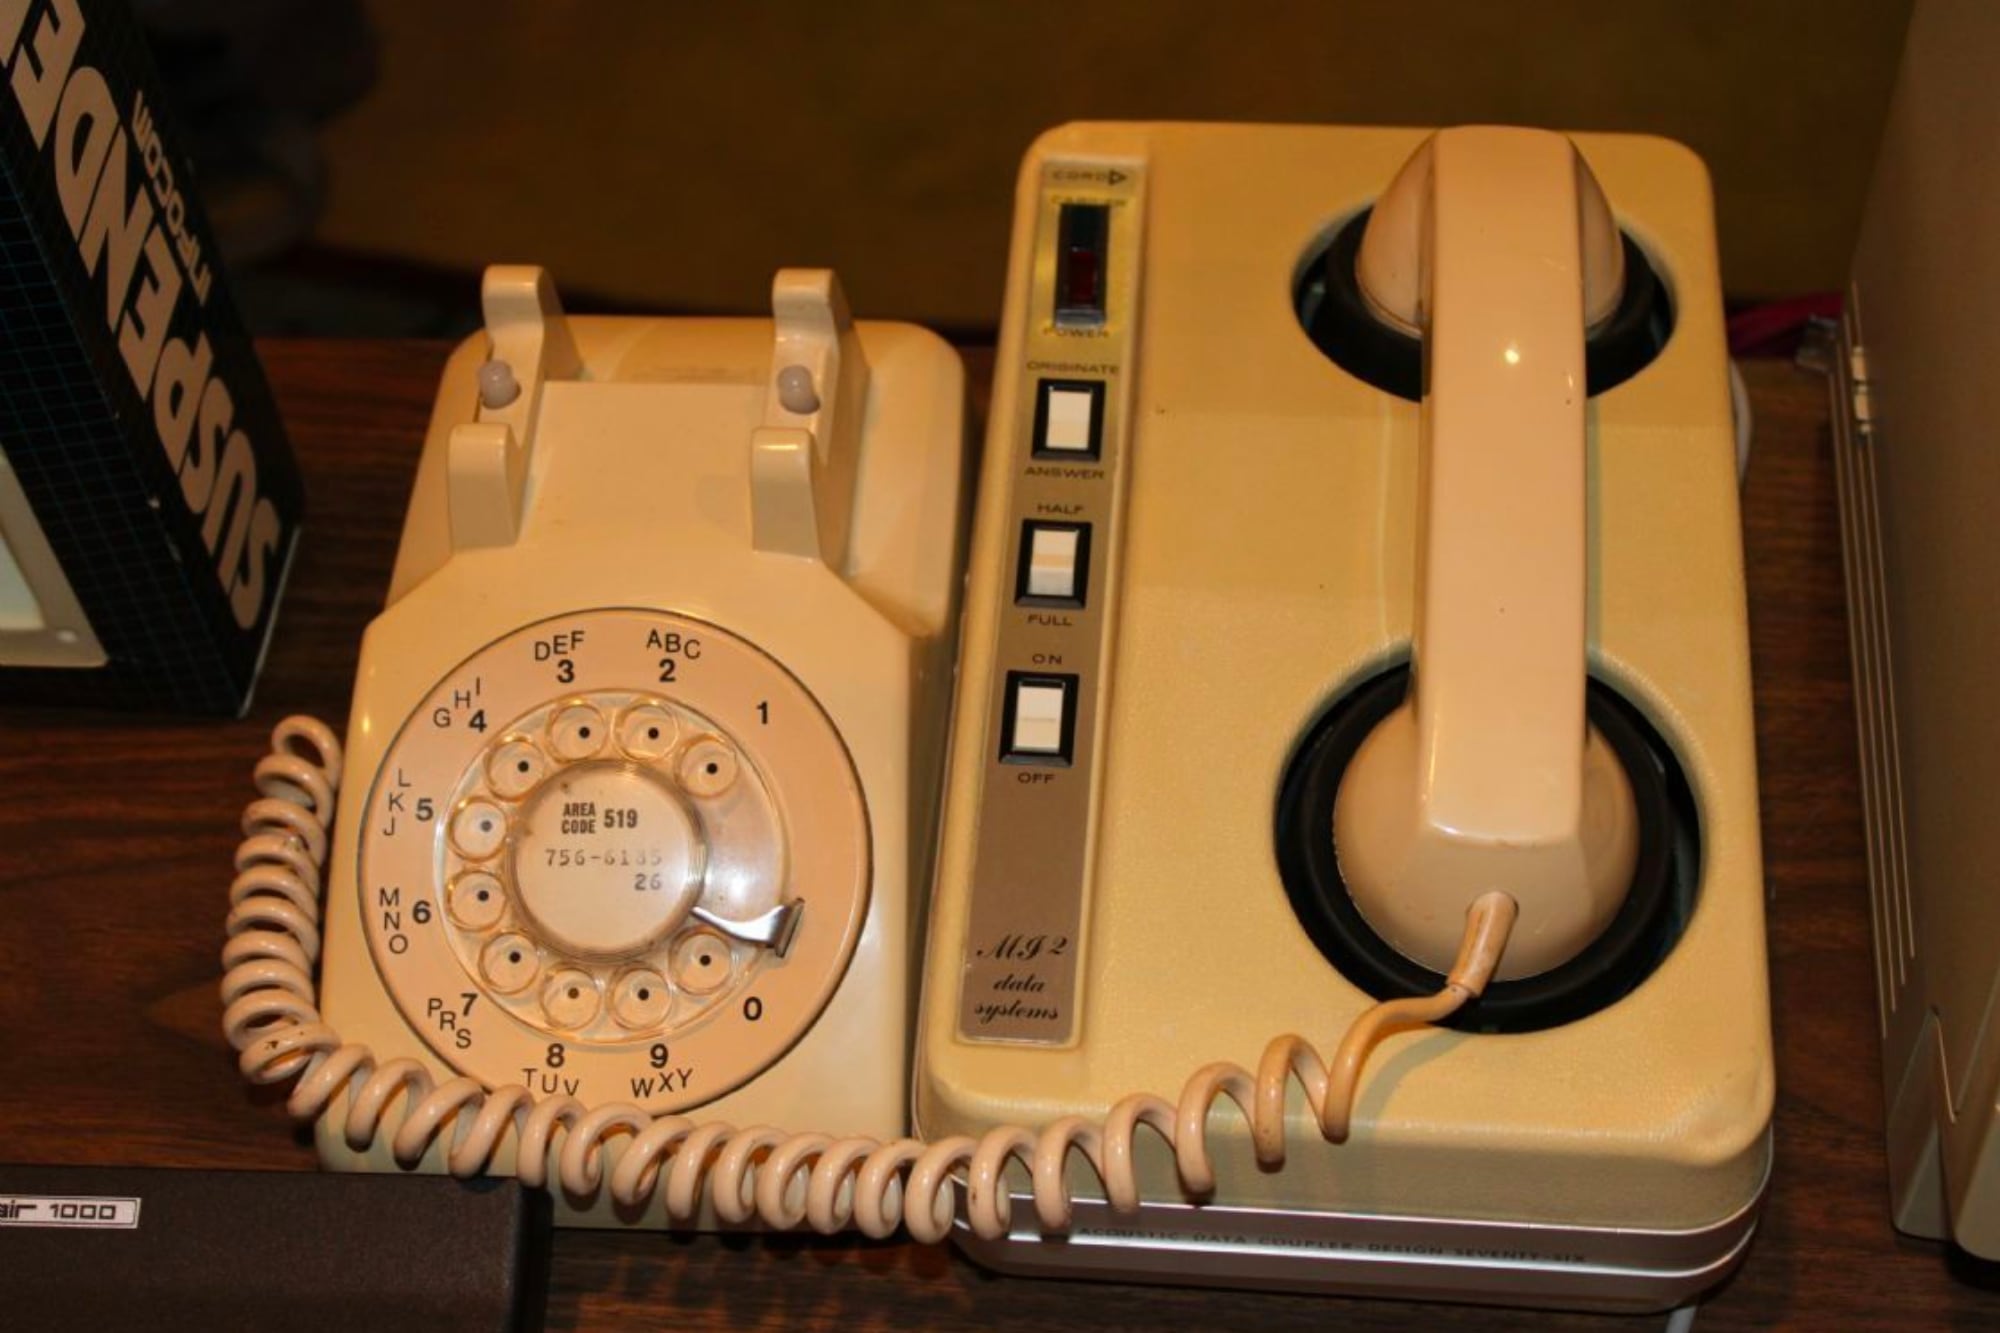 rotary phone with acoustic coupler